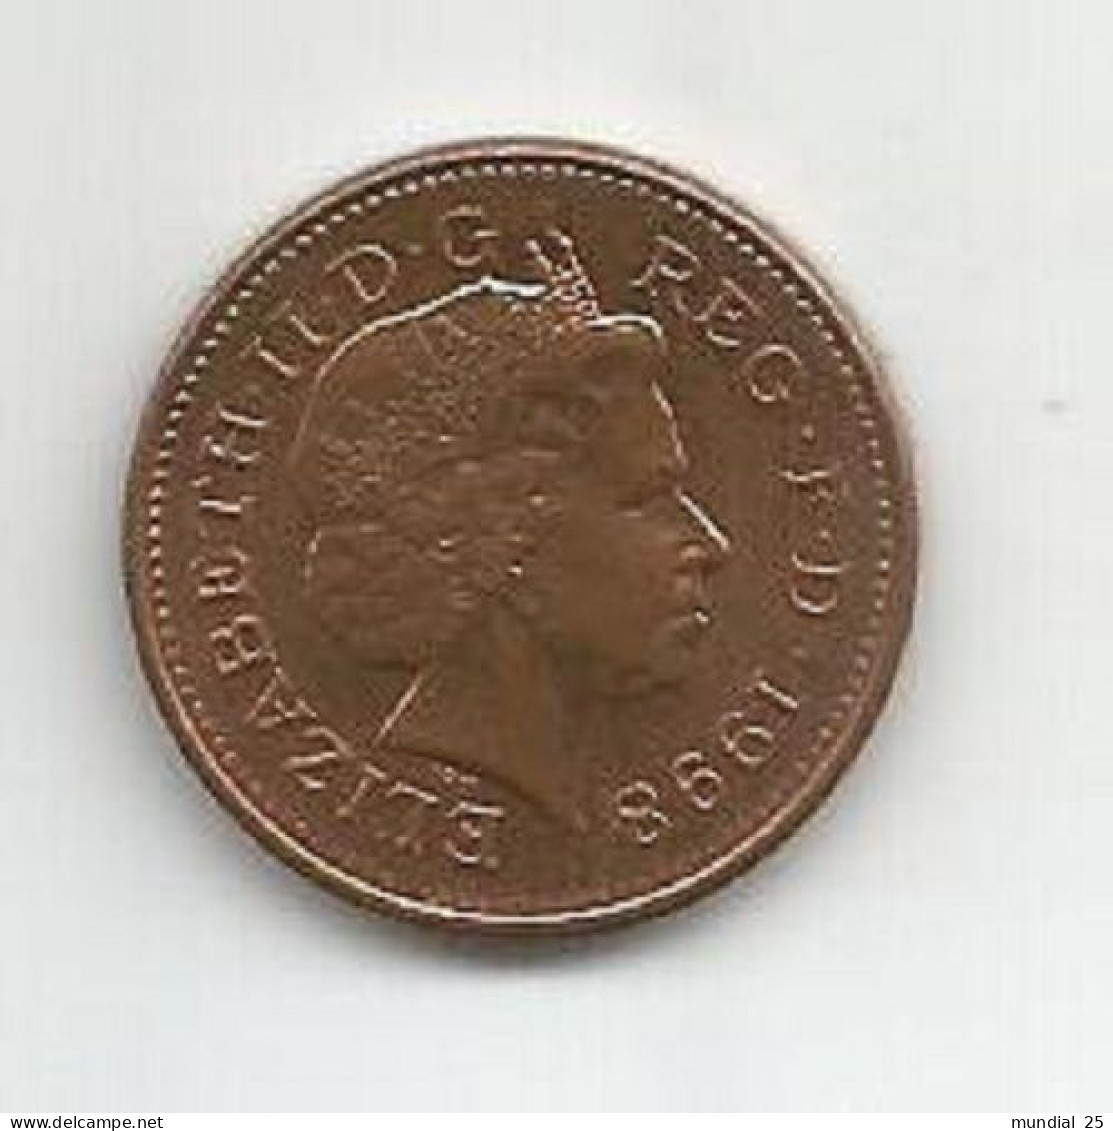 GREAT BRITAIN 1 PENNY 1998 - 1 Penny & 1 New Penny